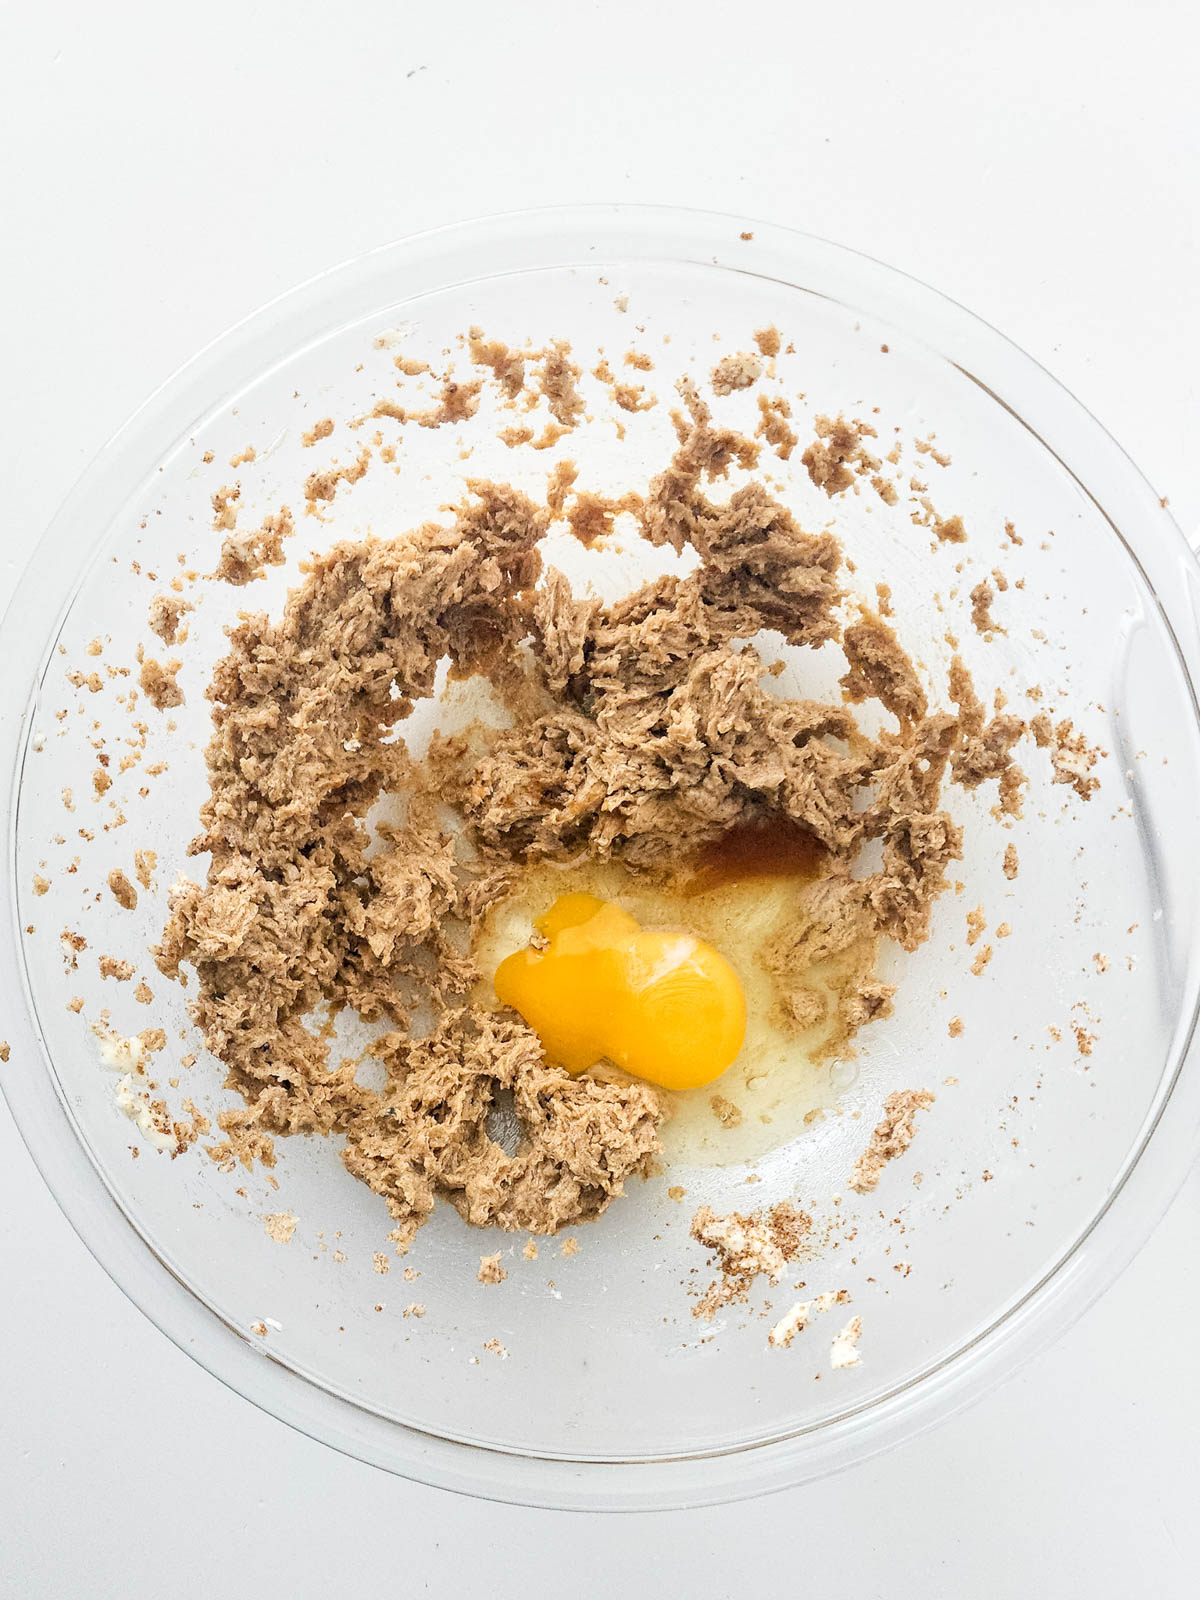 Egg combined with sugar mixture